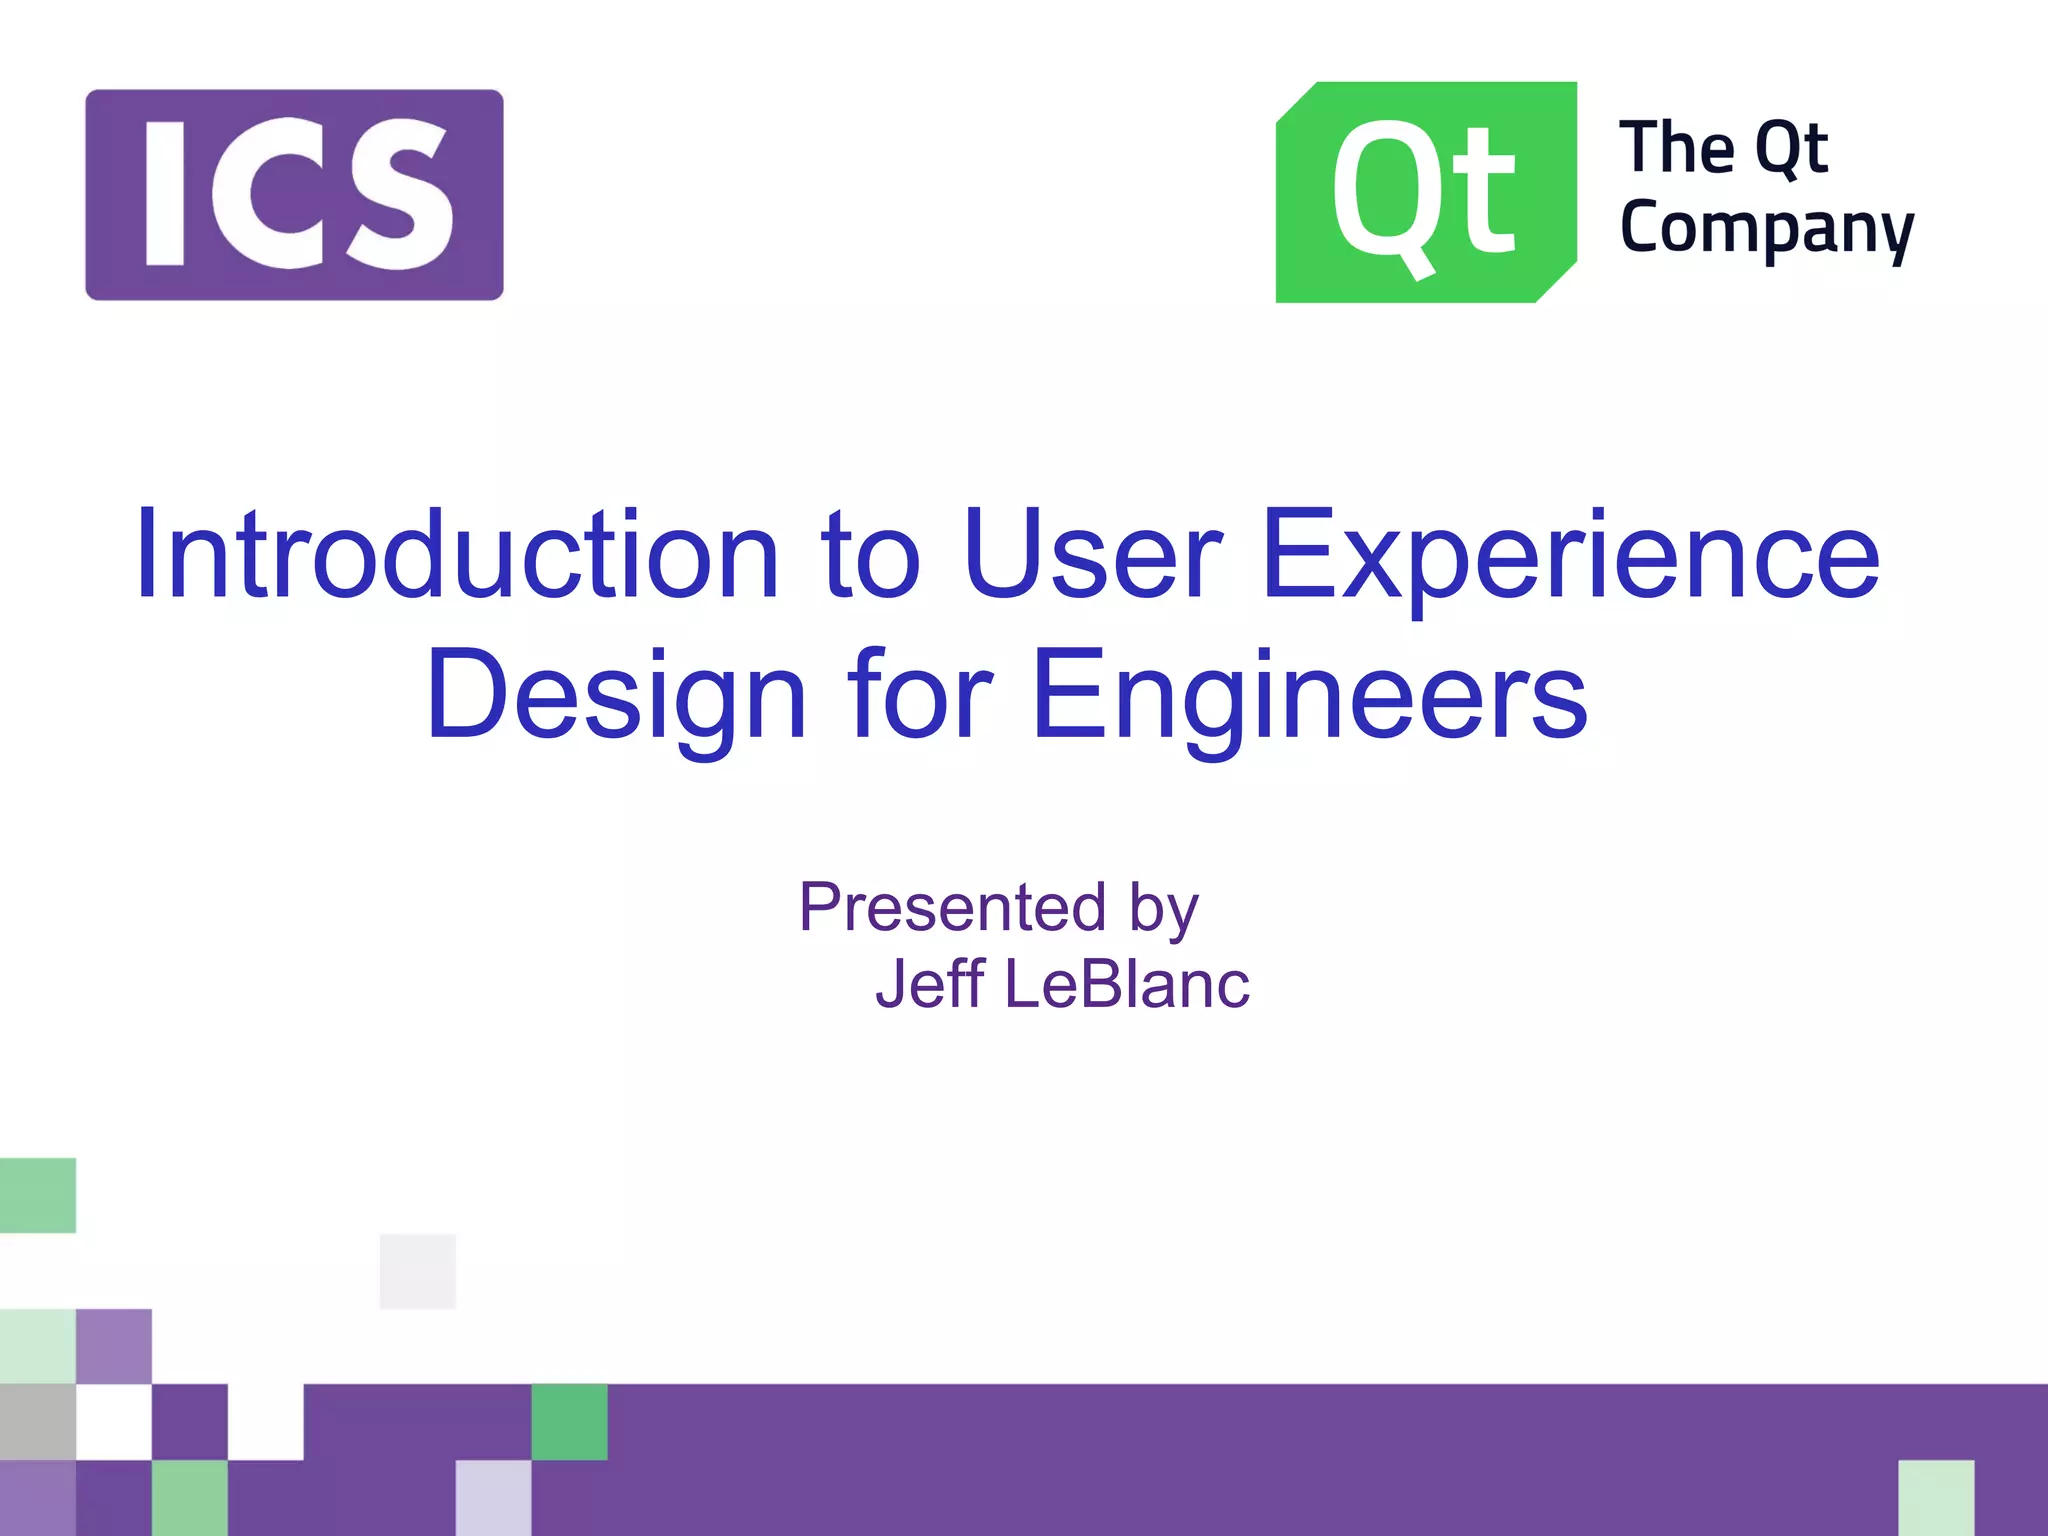 User Experience Design for Software Engineers, ICS & The Qt Company